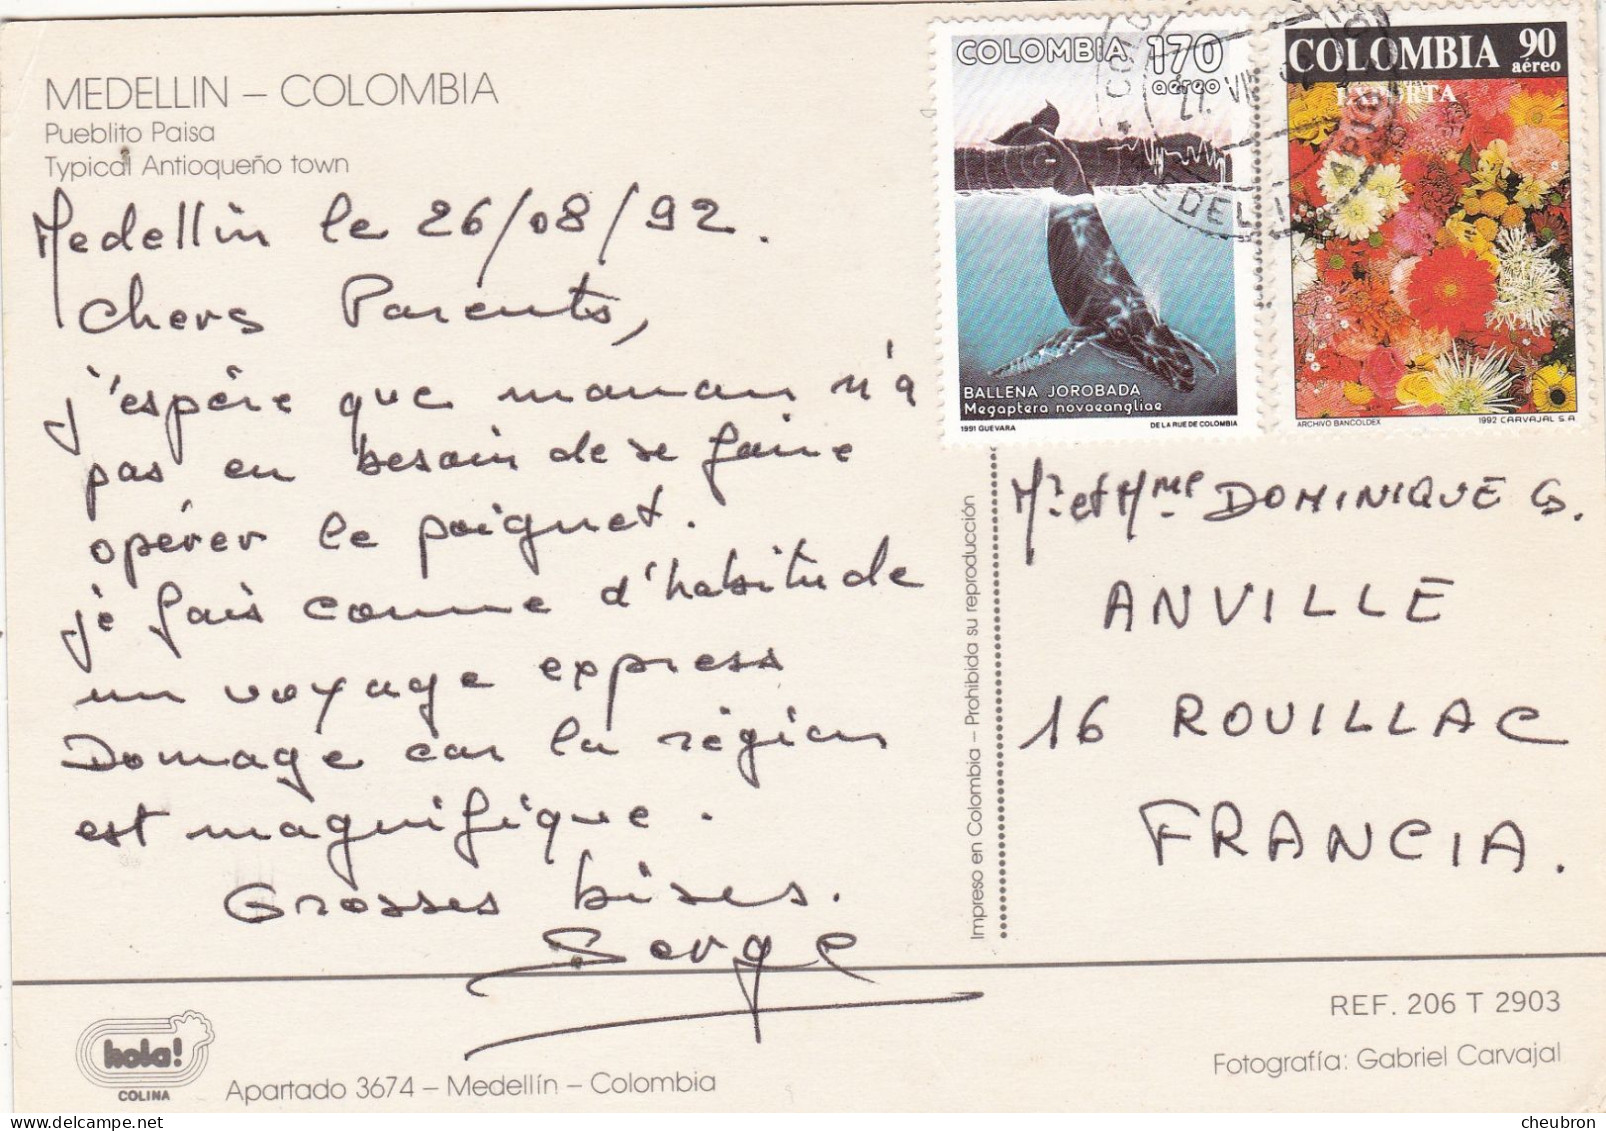 COLOMBIE. MEDELLIN (ENVOYE DE).." TYPICAL ANTIOQUENO TOWN " .ANNEE 1992 + TEXTE + TIMBRES - Colombie